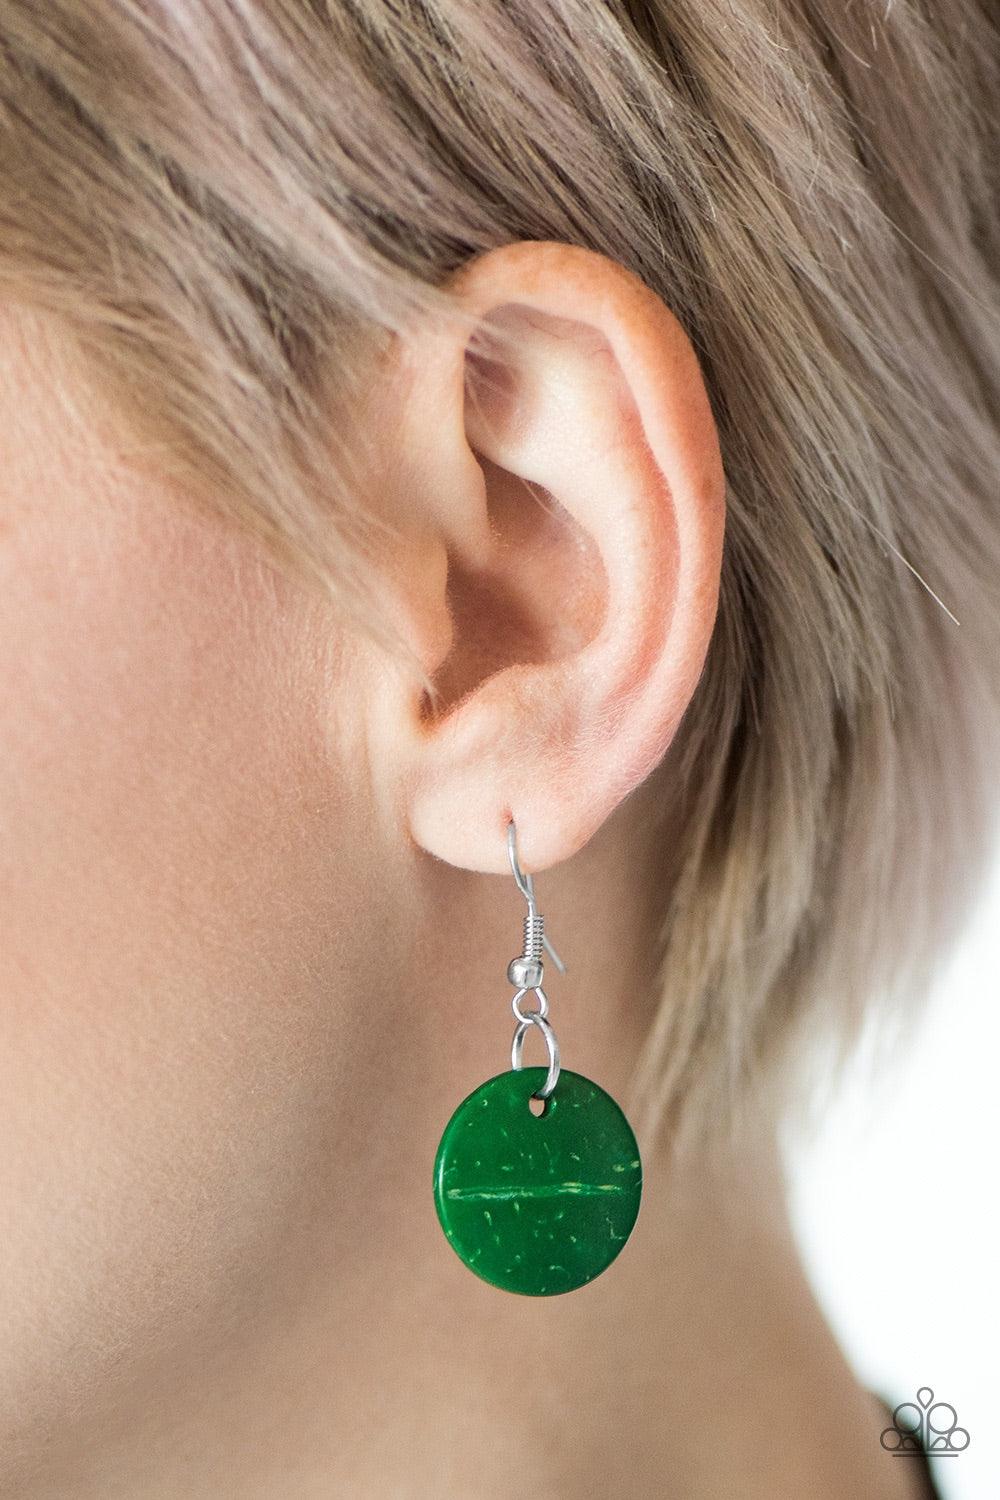 Paparazzi Accessories Jammin In Jamaica - Green Shiny wooden discs brushed in a refreshing green finish trickle along shiny brown cording, creating clustered layers below the collar. Features a button-loop closure. Jewelry